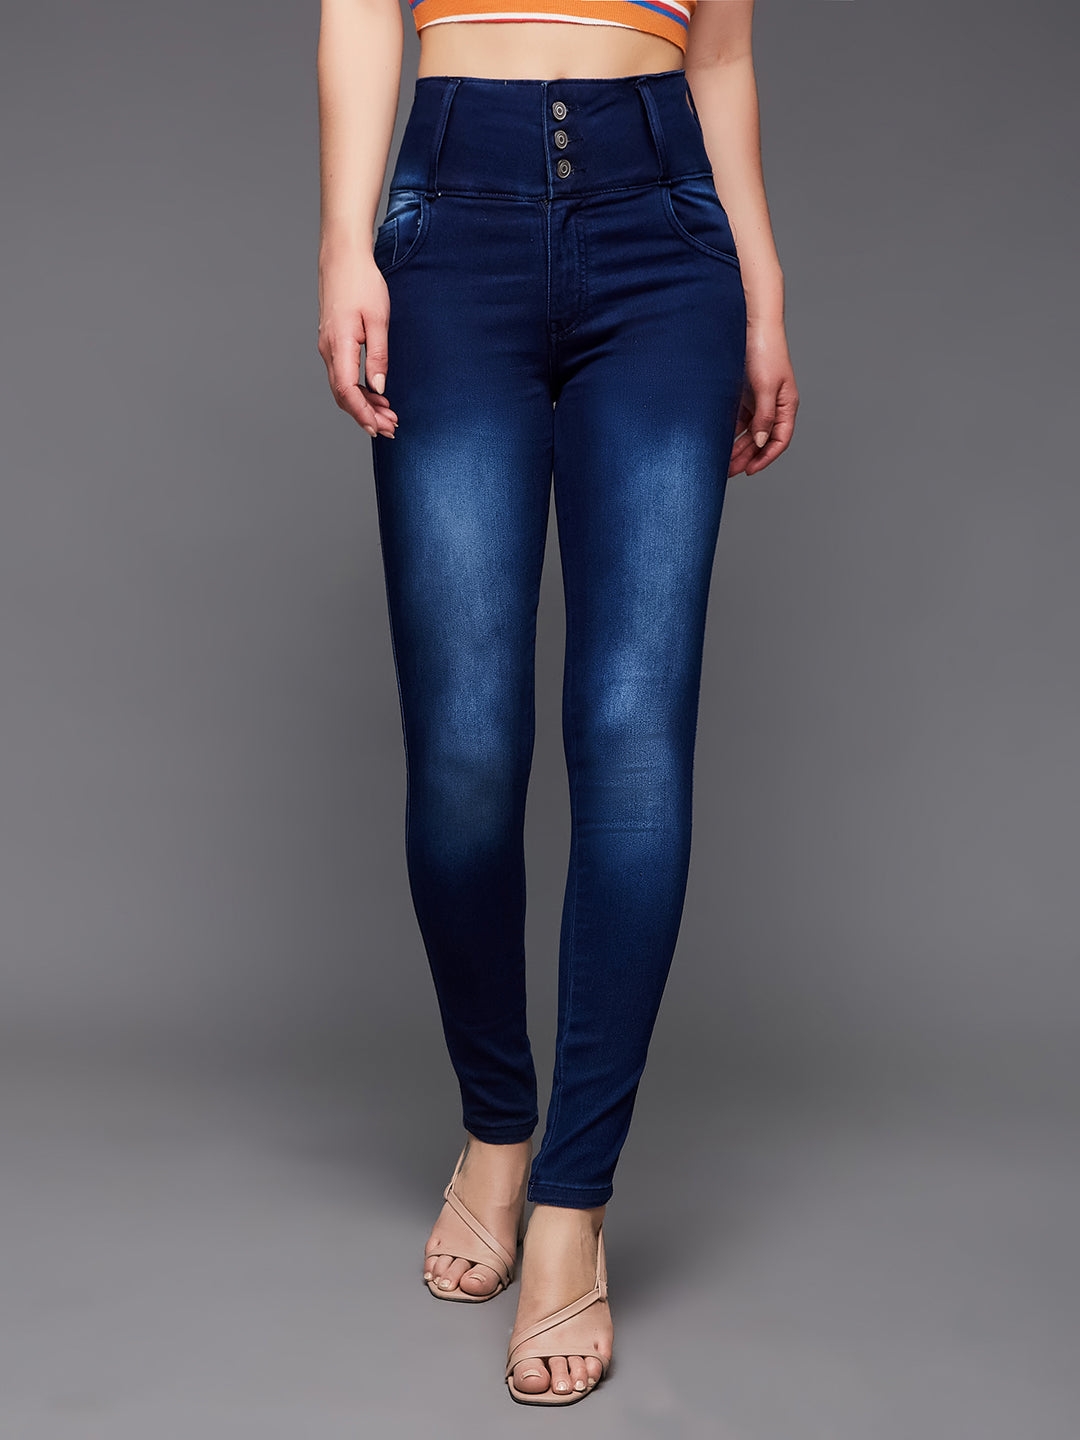 Navy Blue Skinny Fit High Rise Clean Look Regular Length Stretchable High Waist Denim Jeans